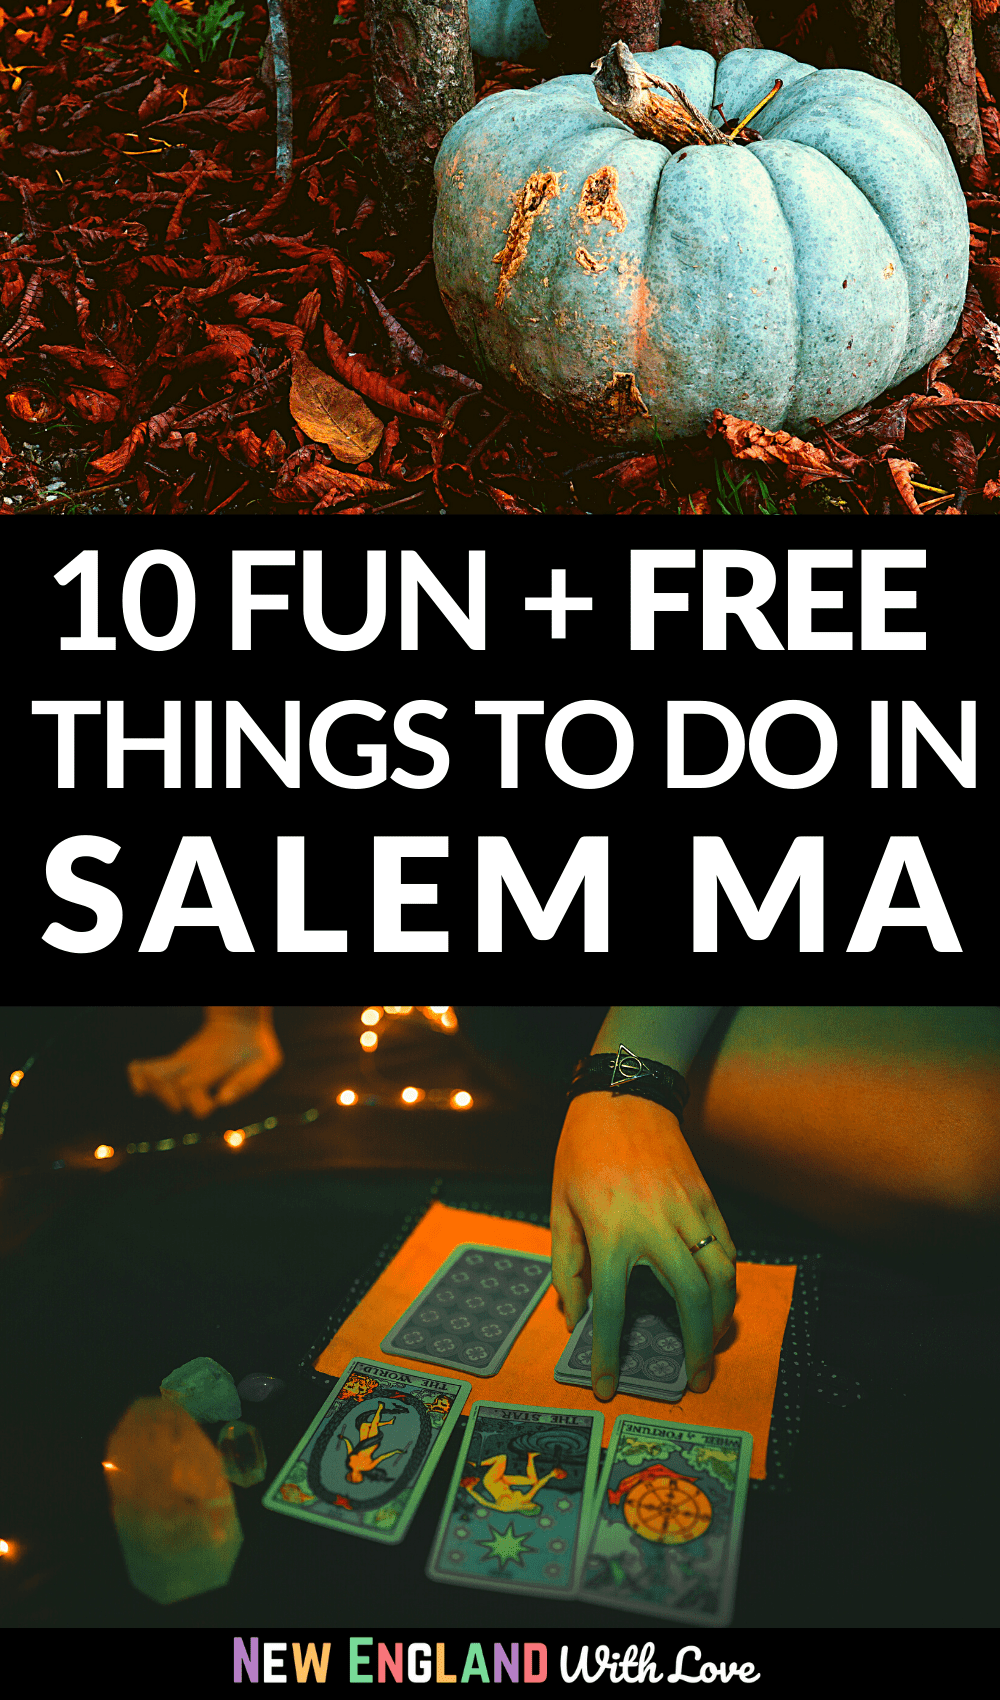 Pinterest graphic reading "10 FUN & FREE THINGS TO DO IN SALEM MA"